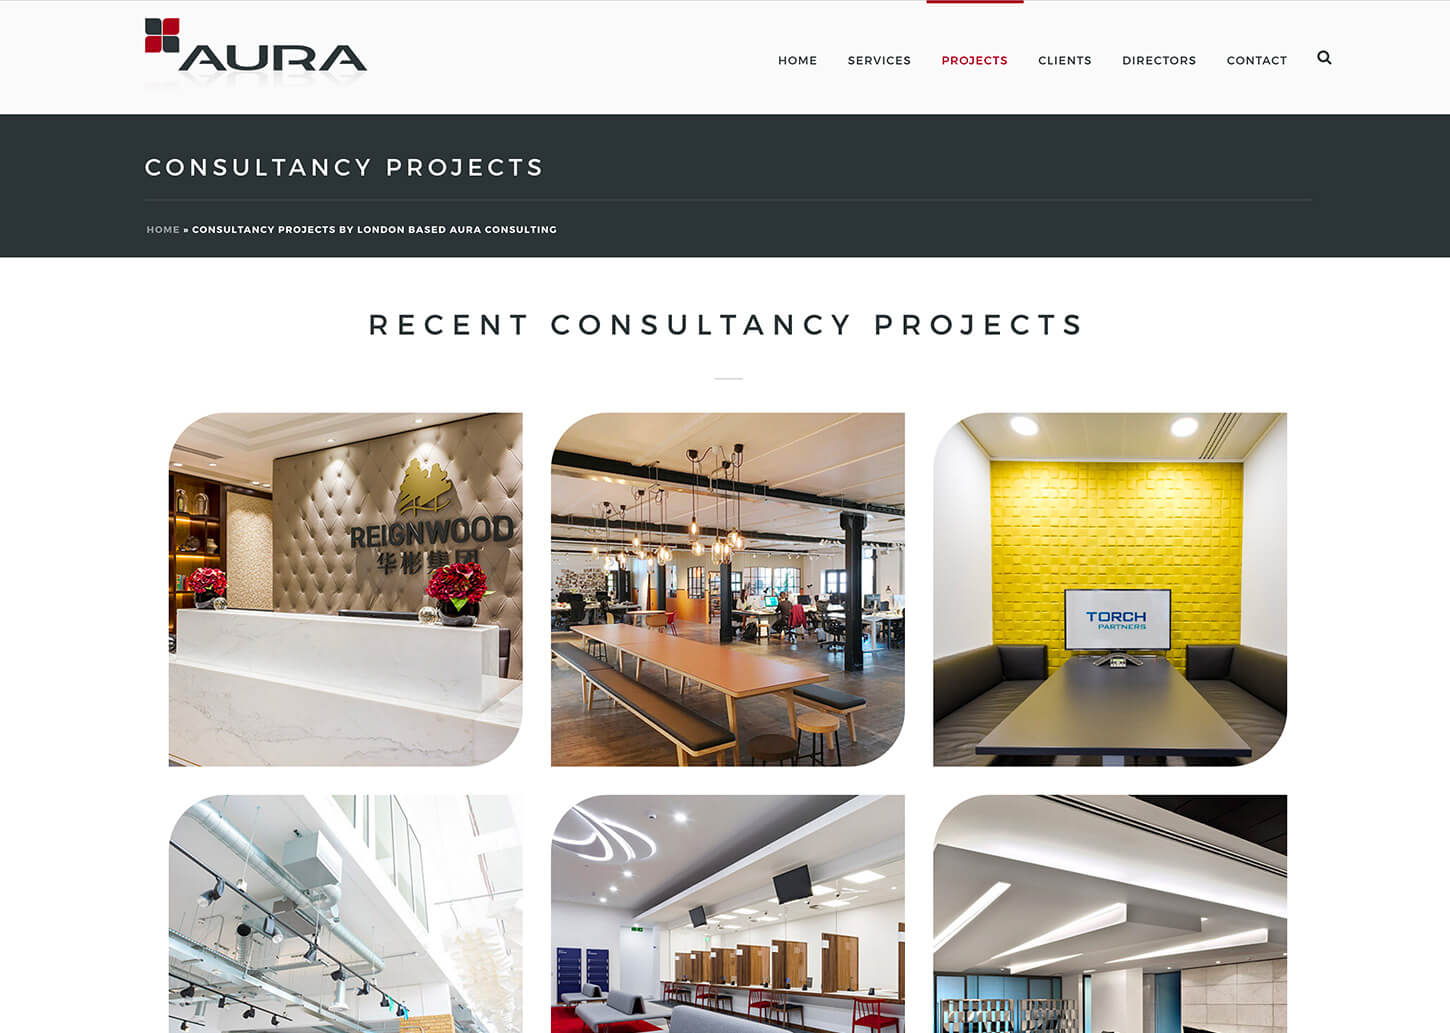 Project management company website: Consultancy project page